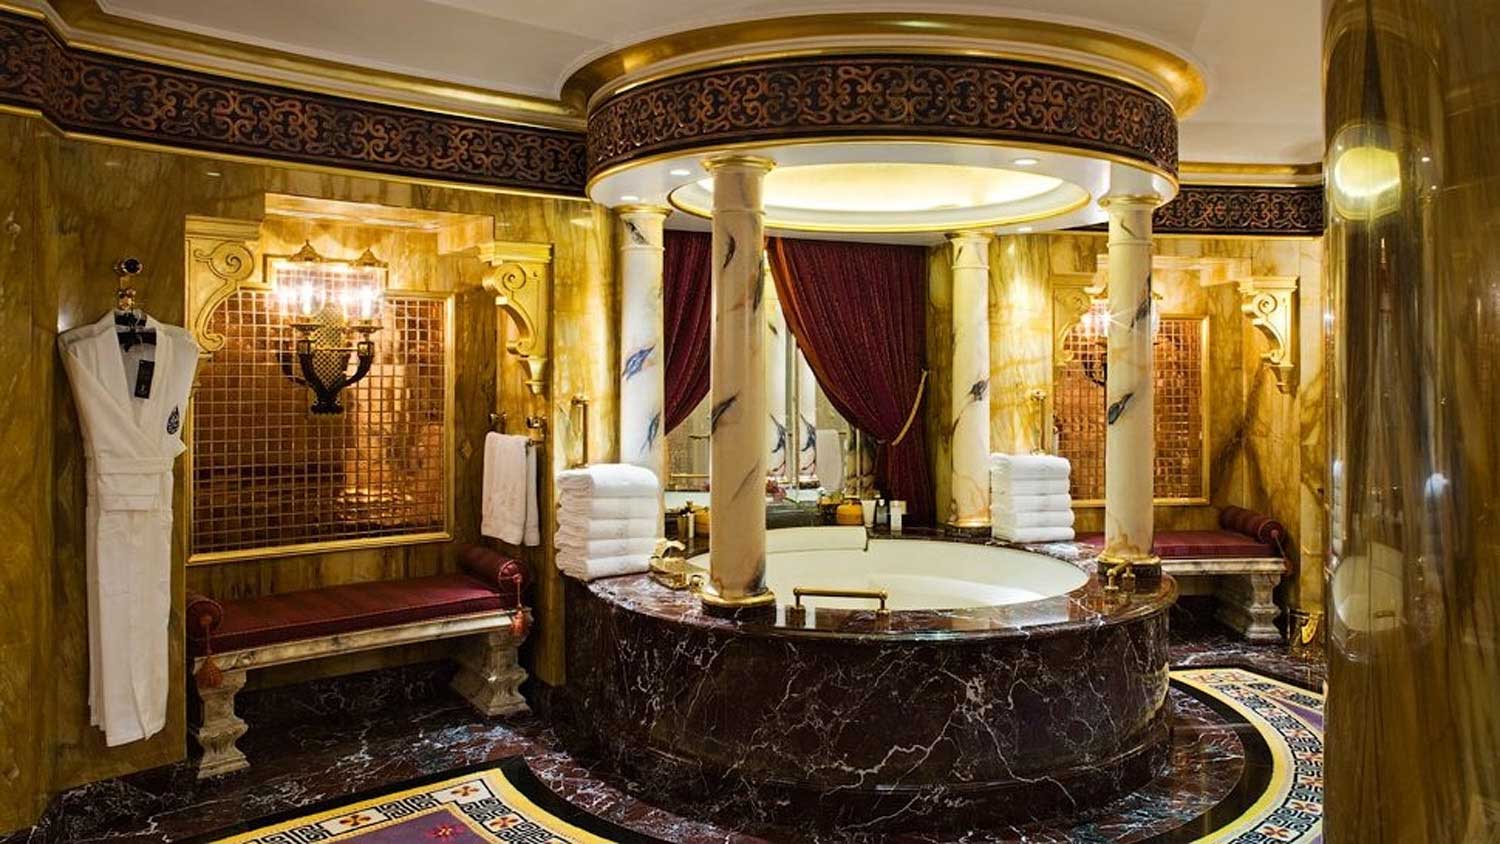 Gold Bathroom With Luxury Gold Bathroom Decorating Ideas With Jacuzzi Design Indoor Design And Romantic Red Curtains Ideas Also Traditional Floor Marble Design Plus Charming White Towels Idea Bathroom The Most Comfortable Bathroom Decorating Ideas